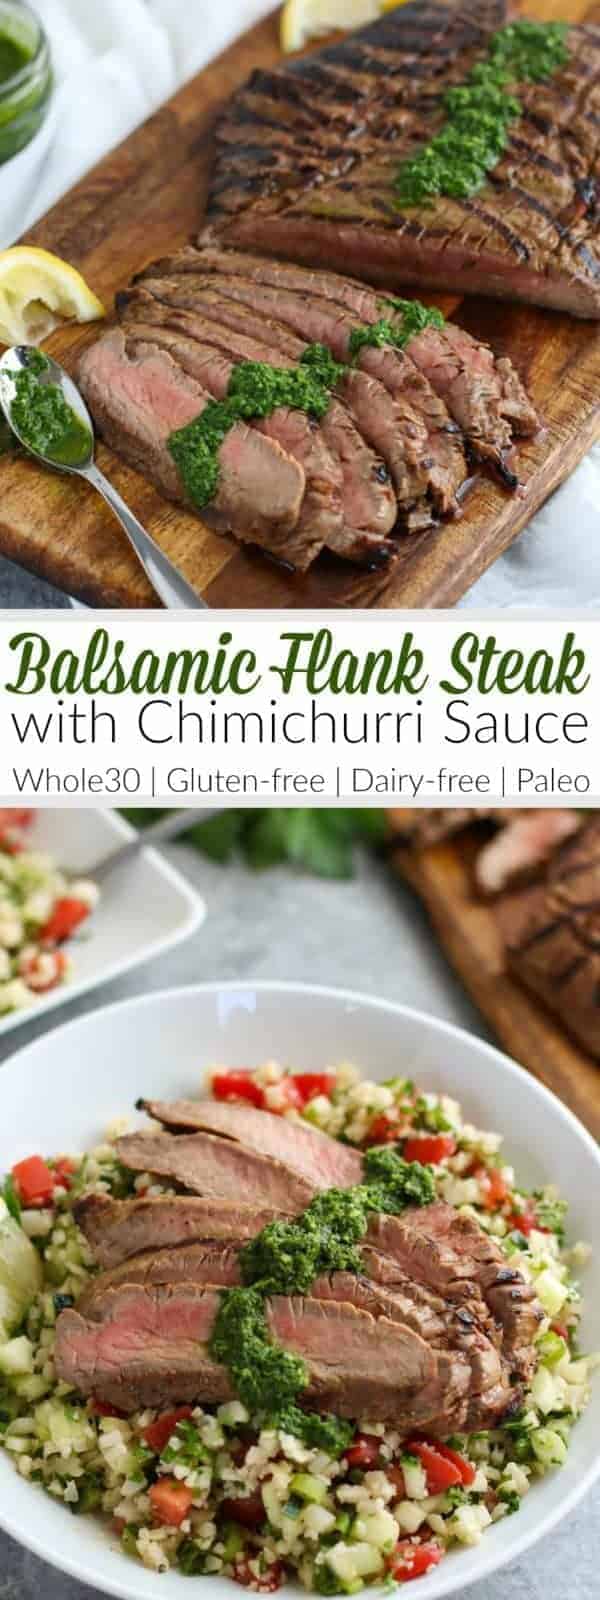 pinterest image for Balsamic Flank Steak with Chimichurri Sauce